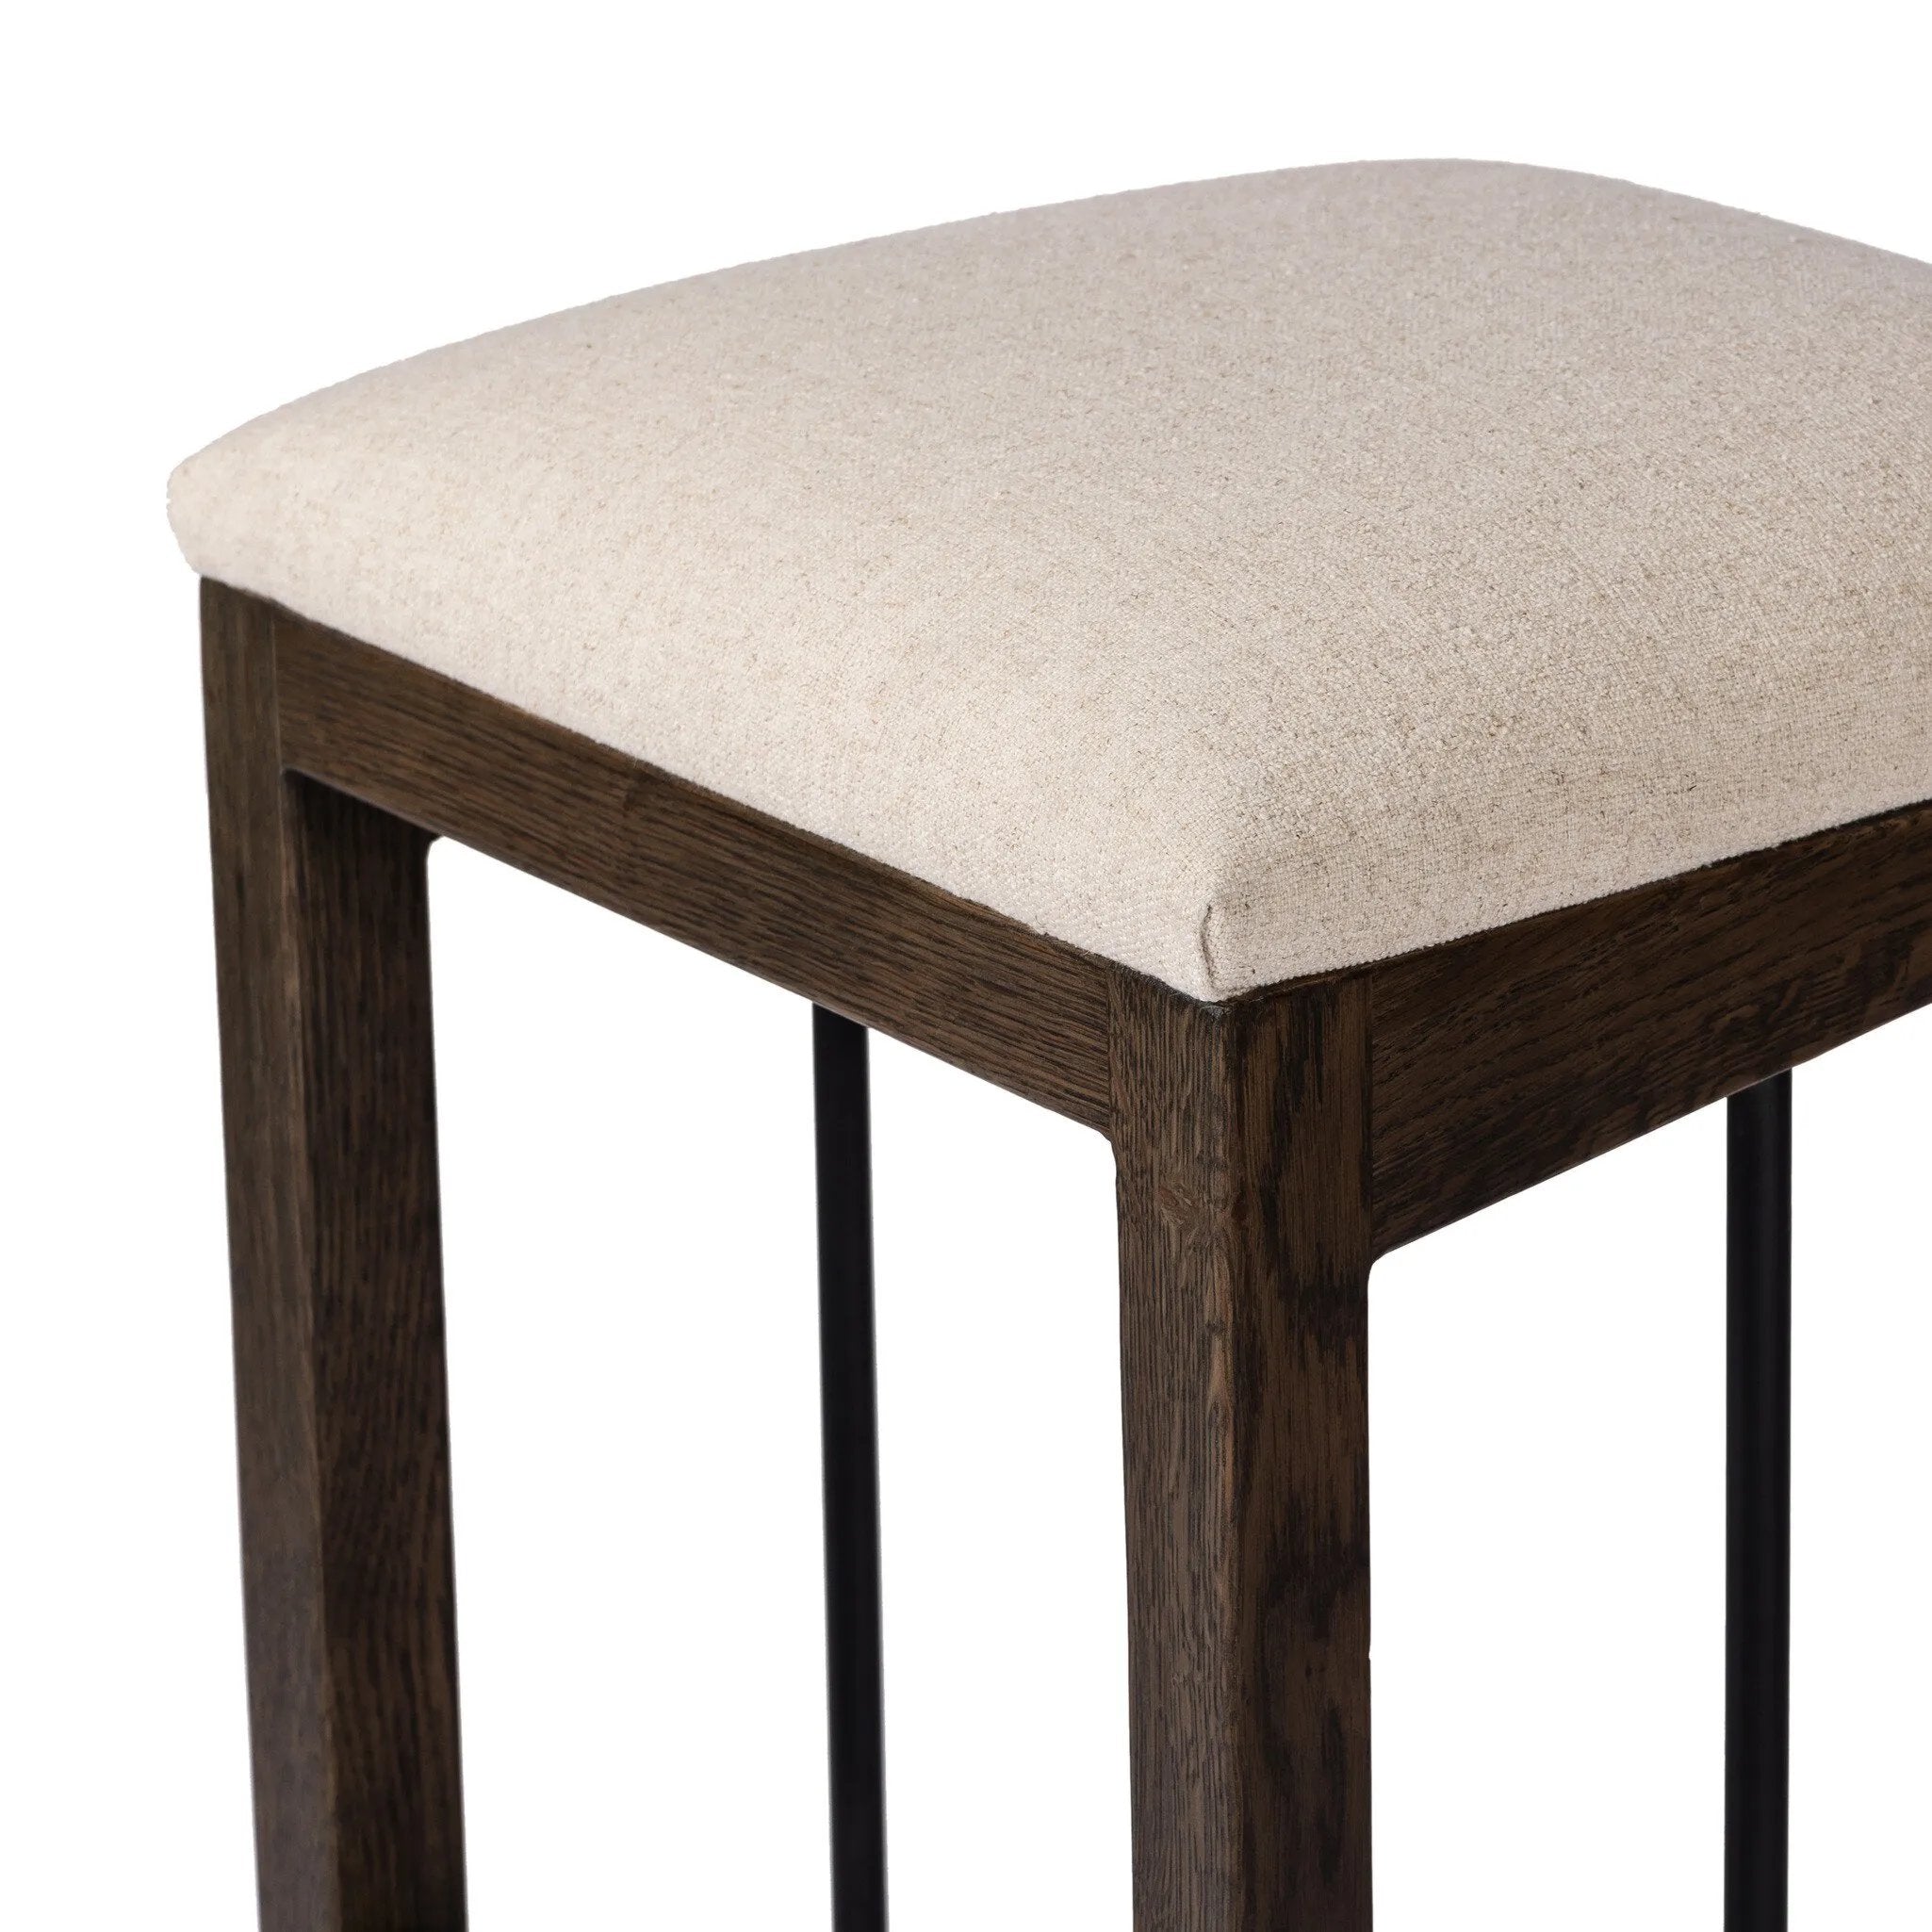 A stunner from every angle, this architecturally inspired stool features an angular base crafted from solid oak with two iron rods for added support and visual interest. Seat is upholstered in a linen/cotton/poly blend performance fabric with subtle texture throughout. Amethyst Home provides interior design, new home construction design consulting, vintage area rugs, and lighting in the San Diego metro area.